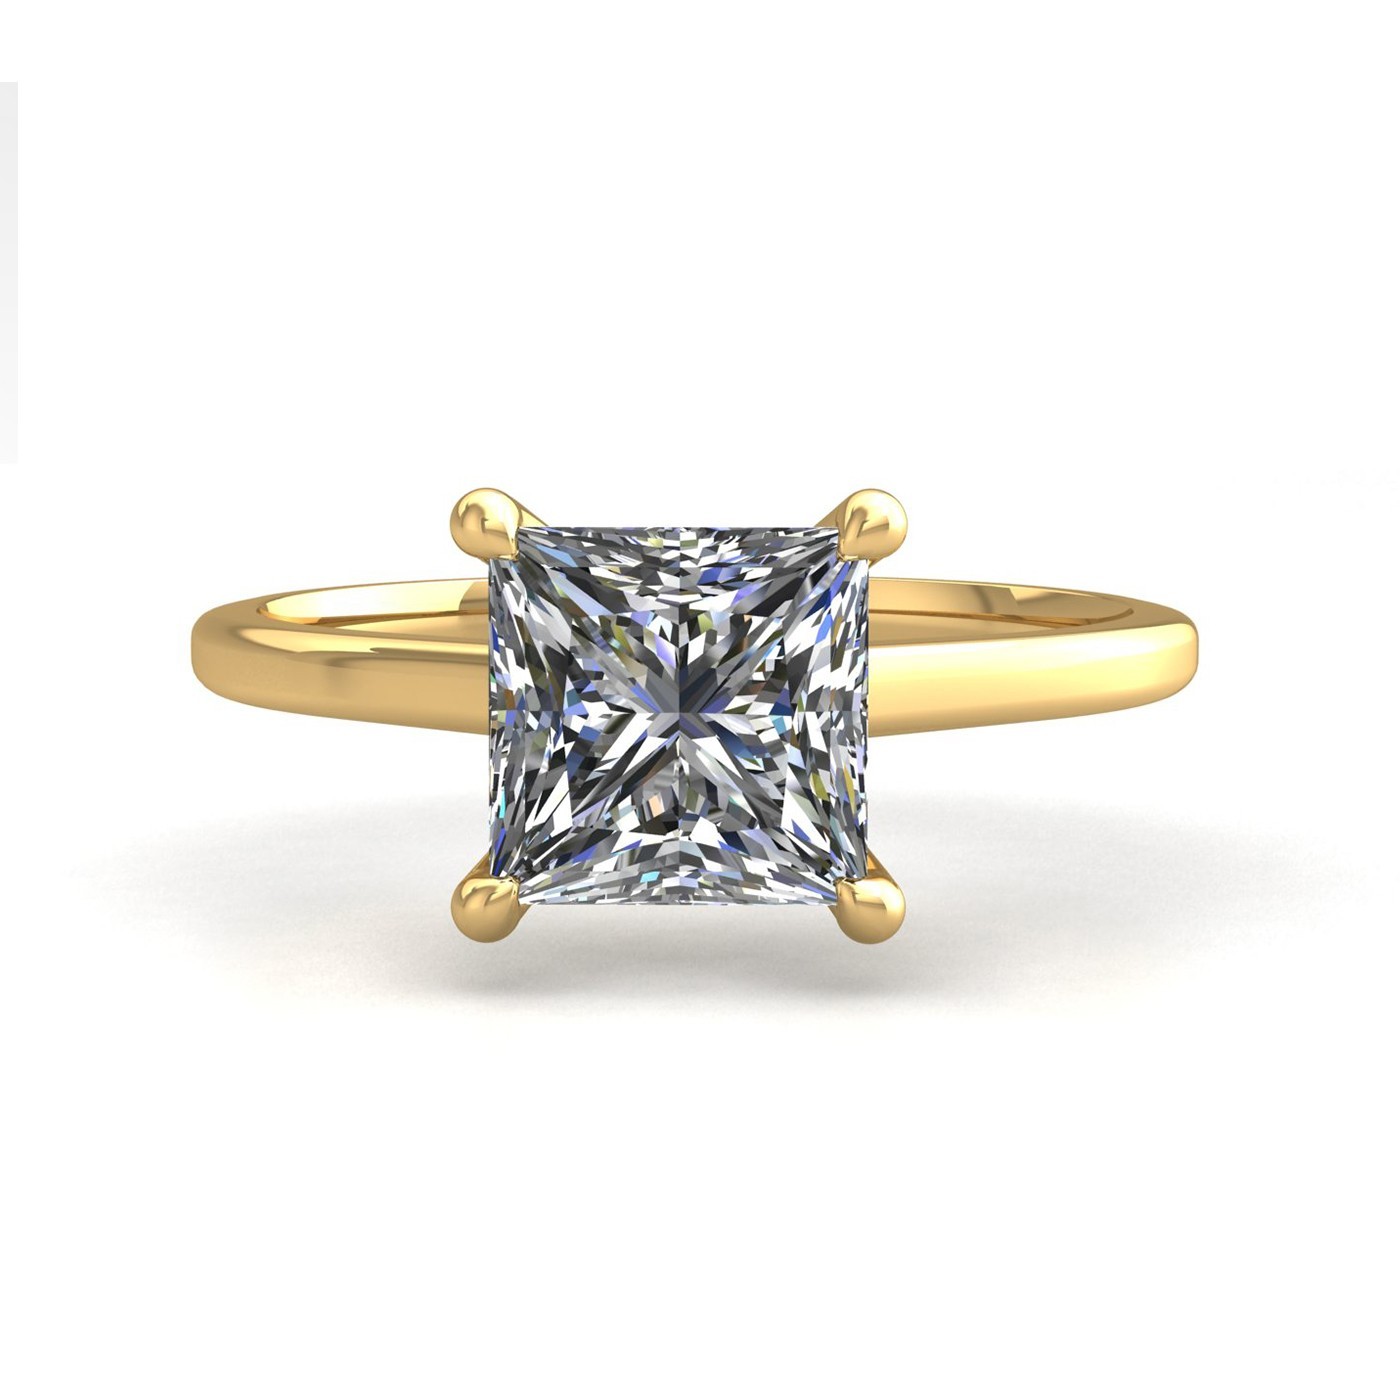 18k yellow gold  1,50 ct 4 prongs solitaire princess cut diamond engagement ring with whisper thin band